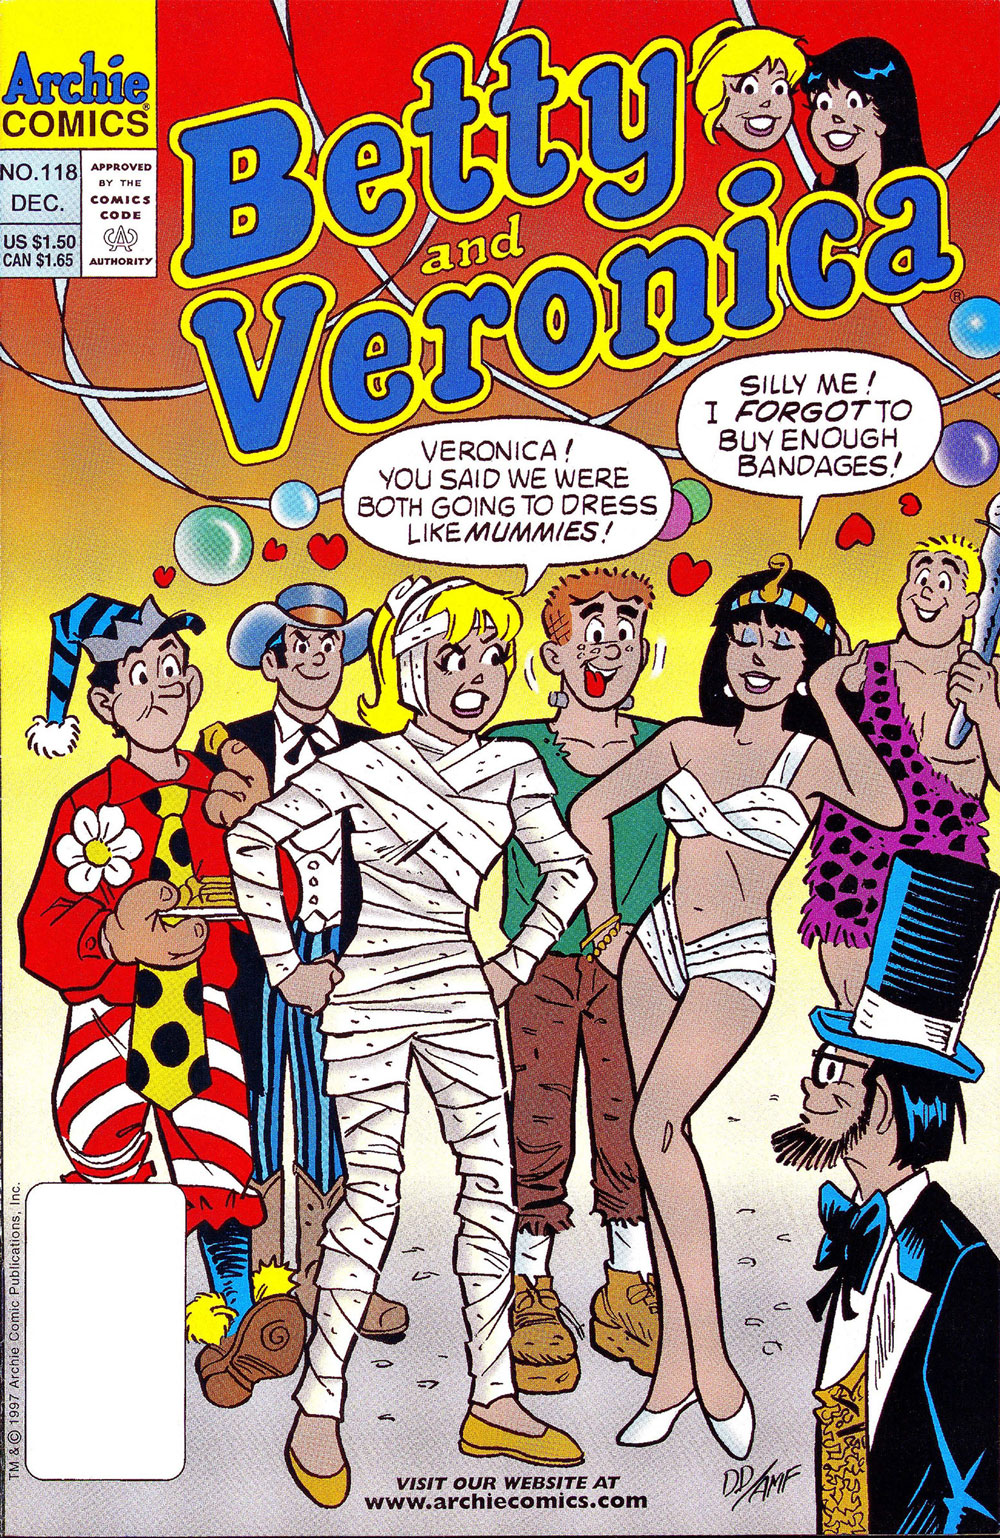 Cover of BETTY AND VERONICA #118. Betty and Veronica are at a Halloween party. They're both dressed as mummies but Betty is mad that Veronica's costume is more revealing.